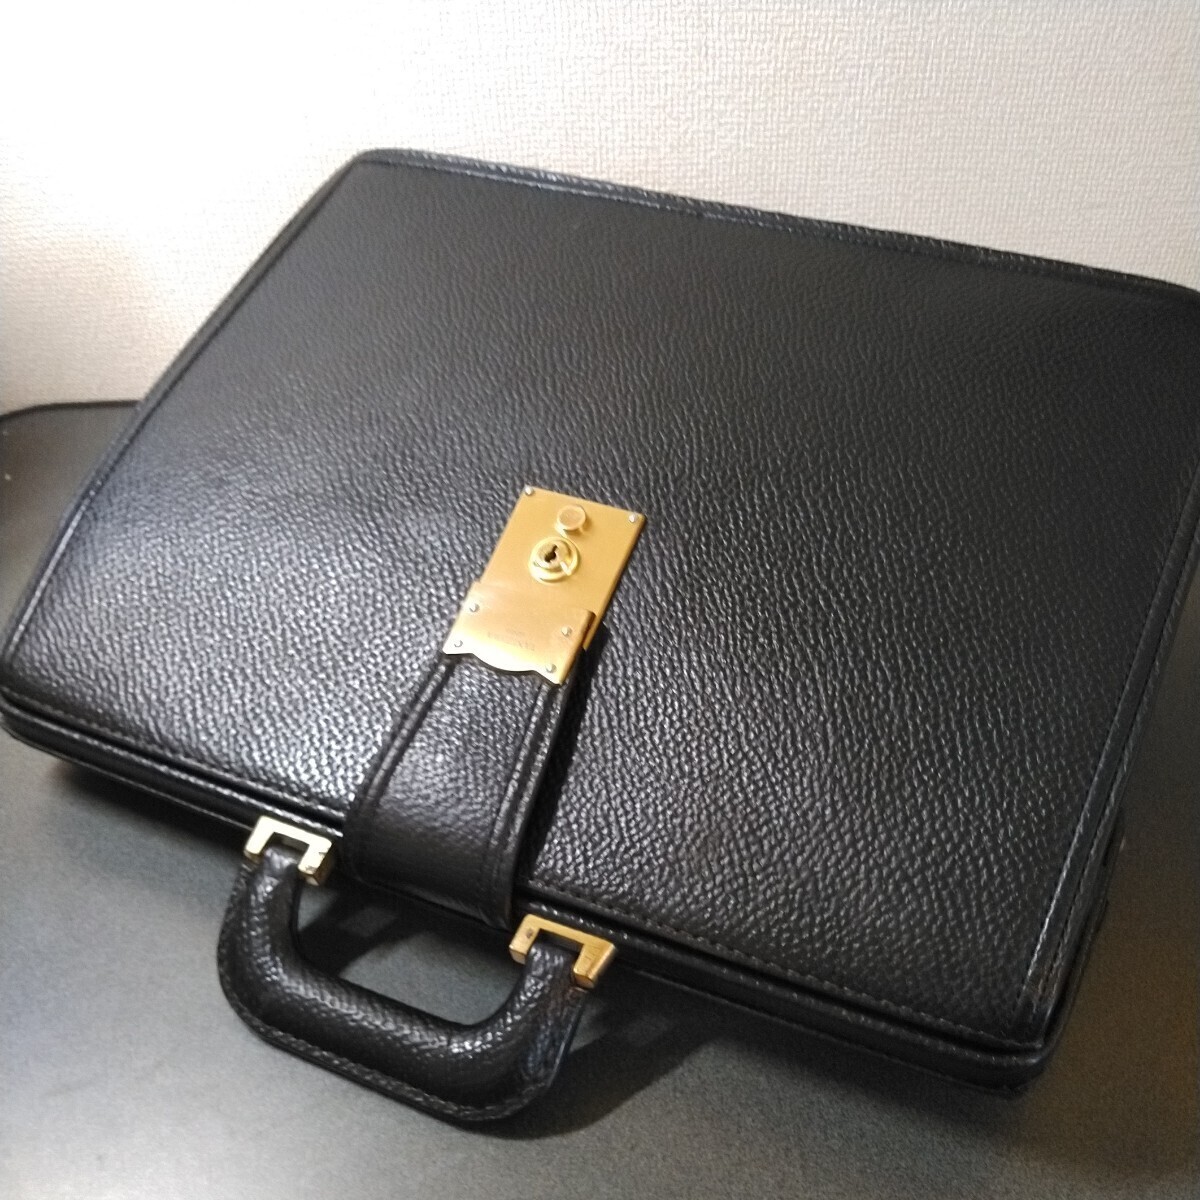  super-beauty goods Imperial Family purveyor GINZA TANIZAWA leather bru Dulles bag buy price 143000 jpy 